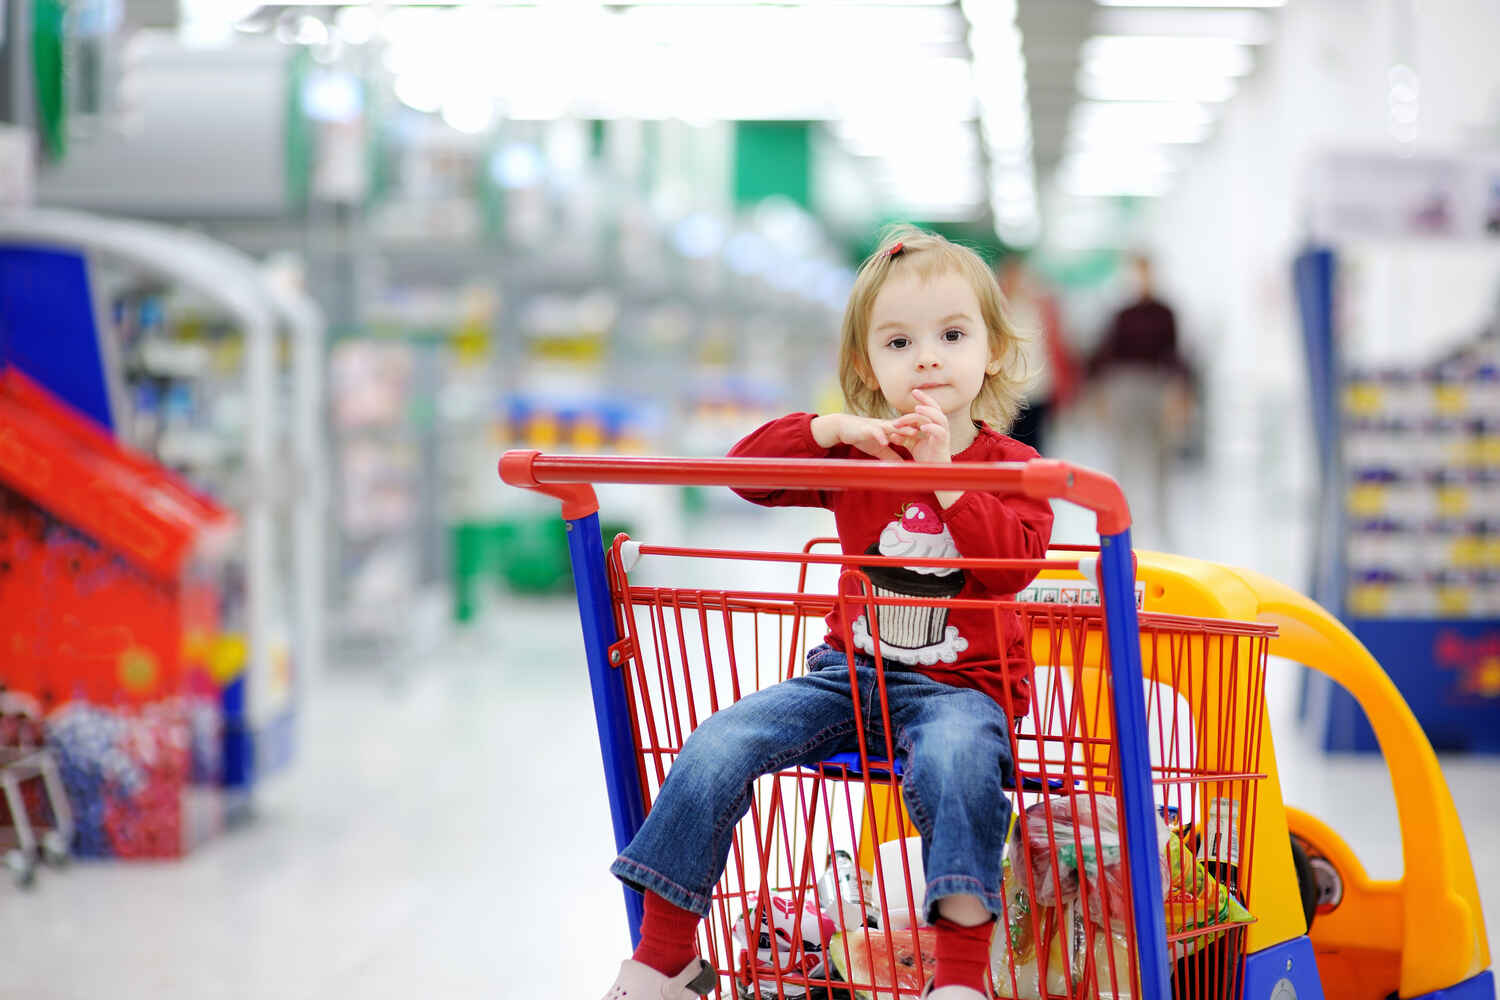 Don't let your kid stand in shopping cart